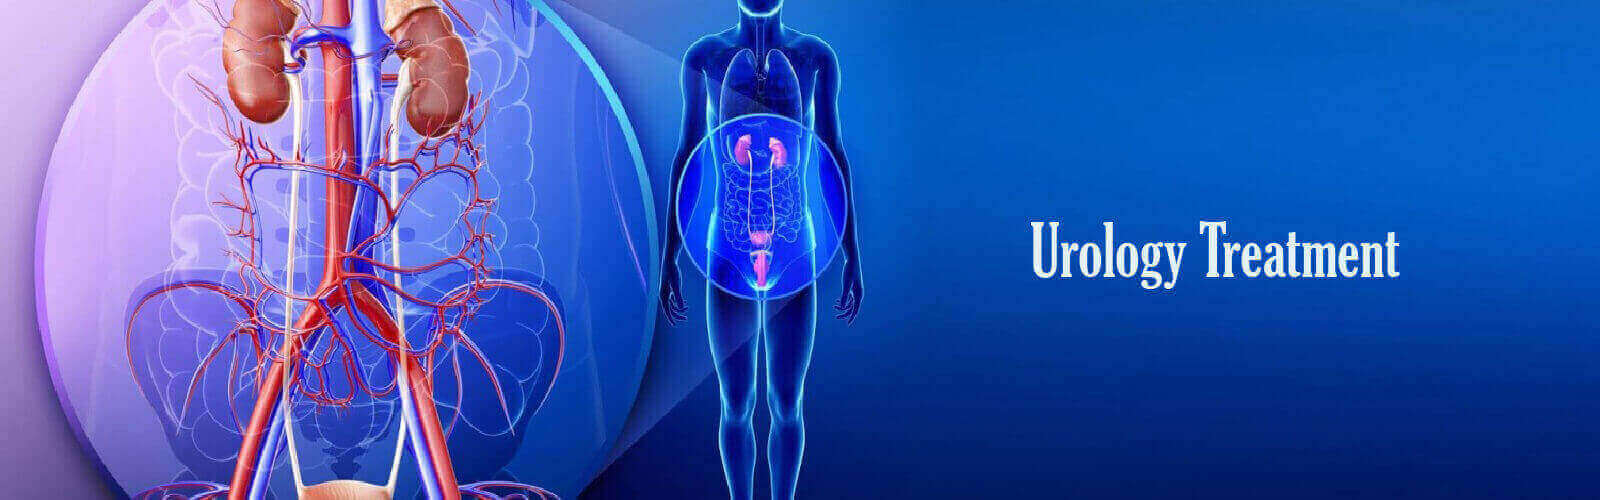 Urology Treatment in United States